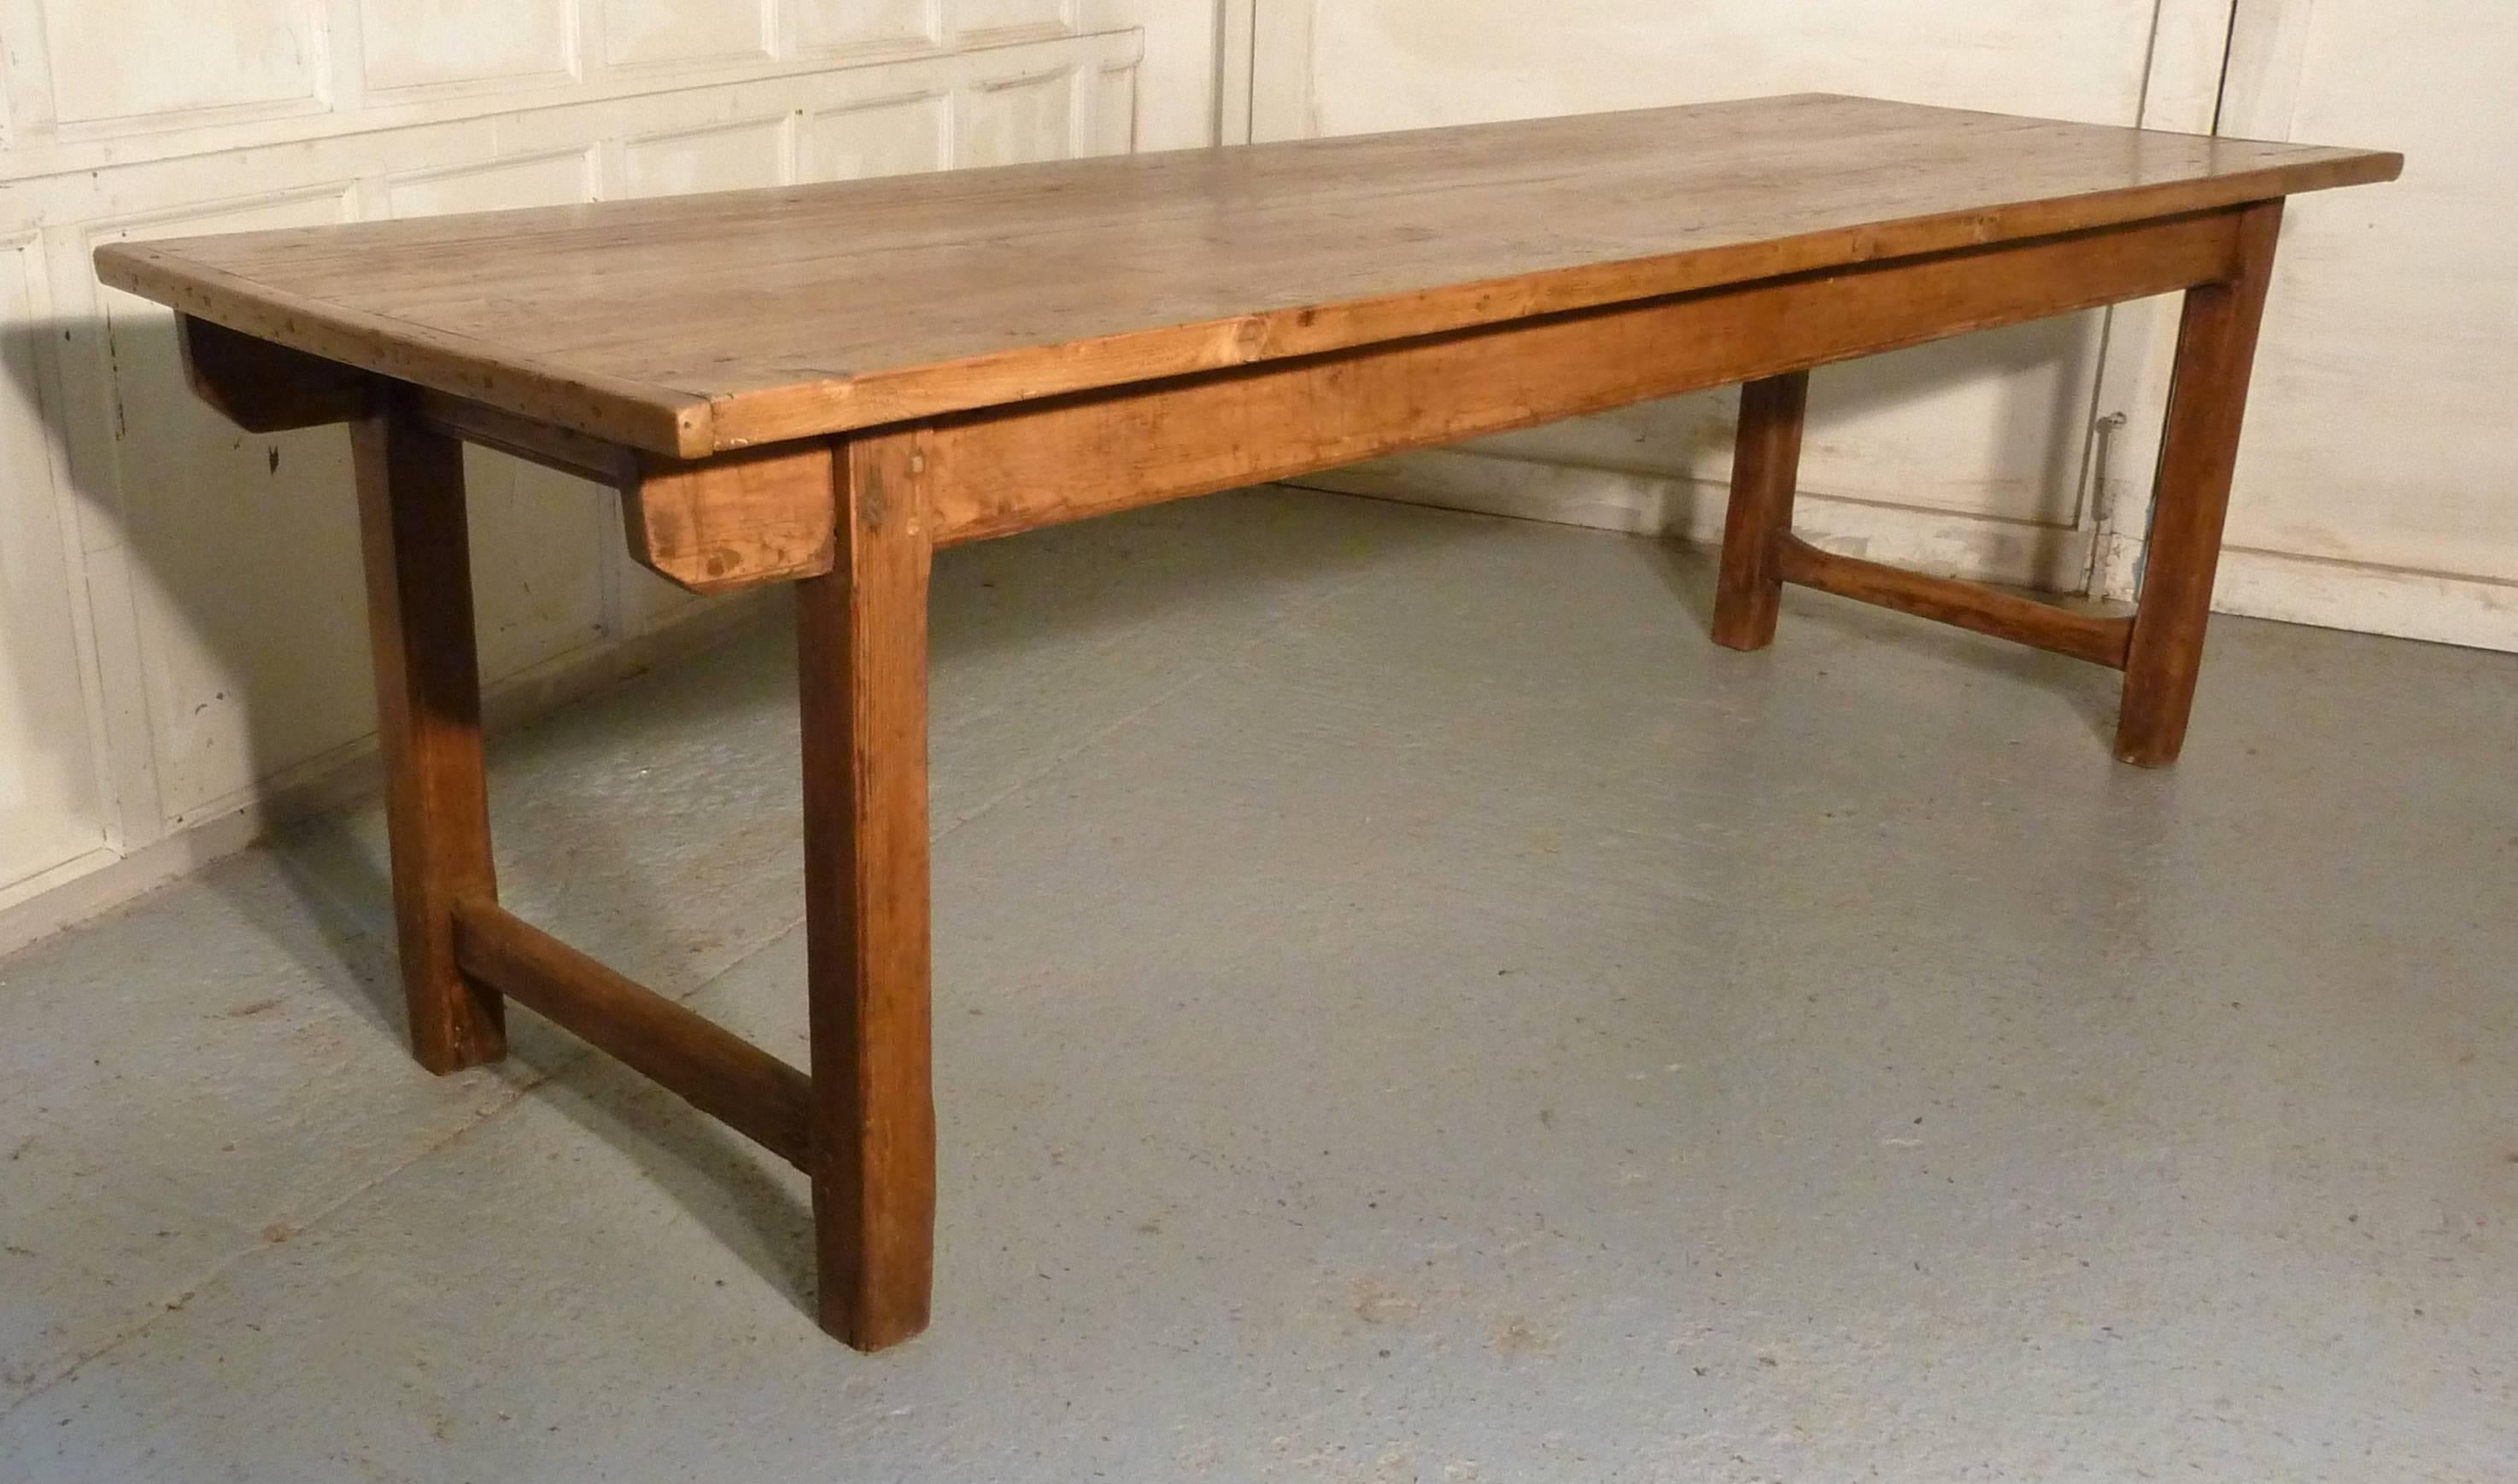 Large 19th Century French Rustic Pine Table, Cleated 2 Plank Farmhouse Top In Distressed Condition In Chillerton, Isle of Wight